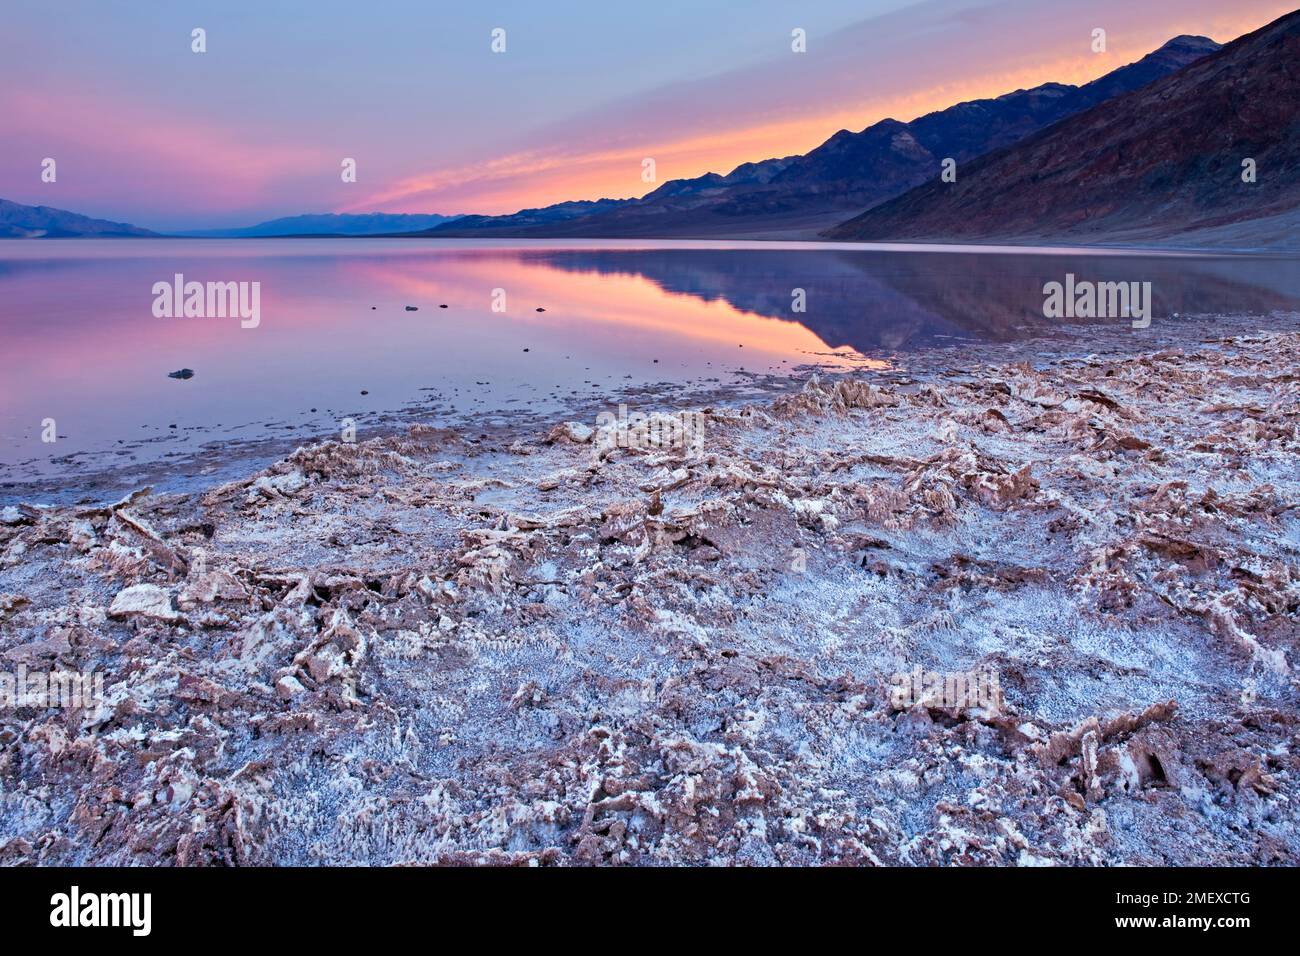 Badwater Basin, Death Valley National Park, California, USA Stock Photo